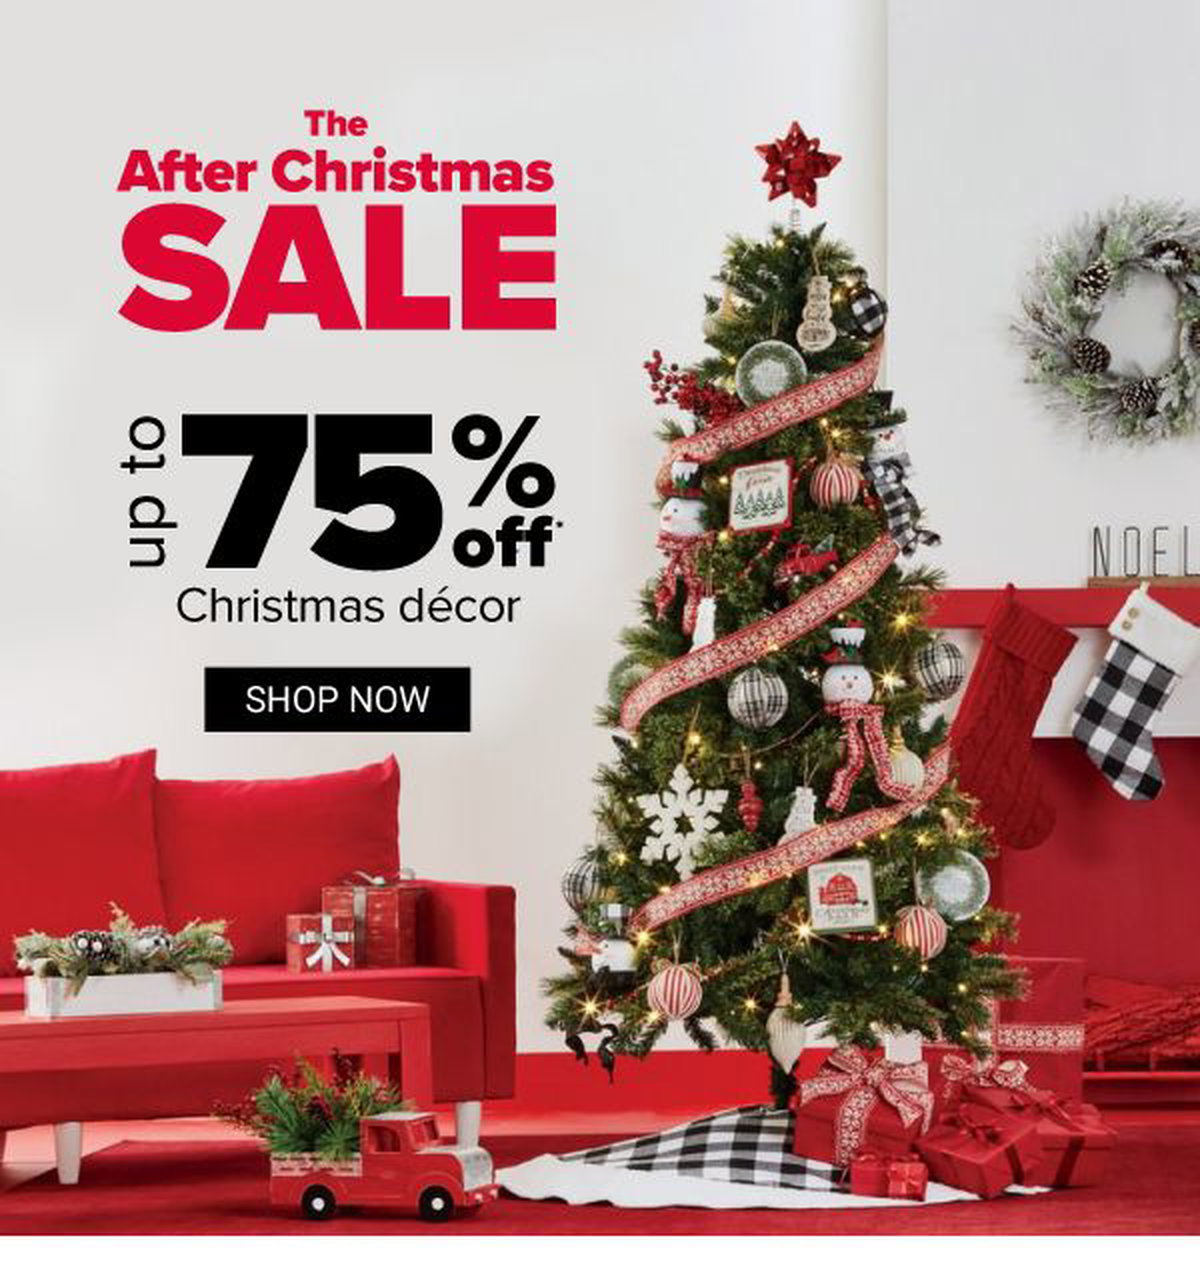 Belk: After Christmas clearance savings! Up to 80% off 🙌